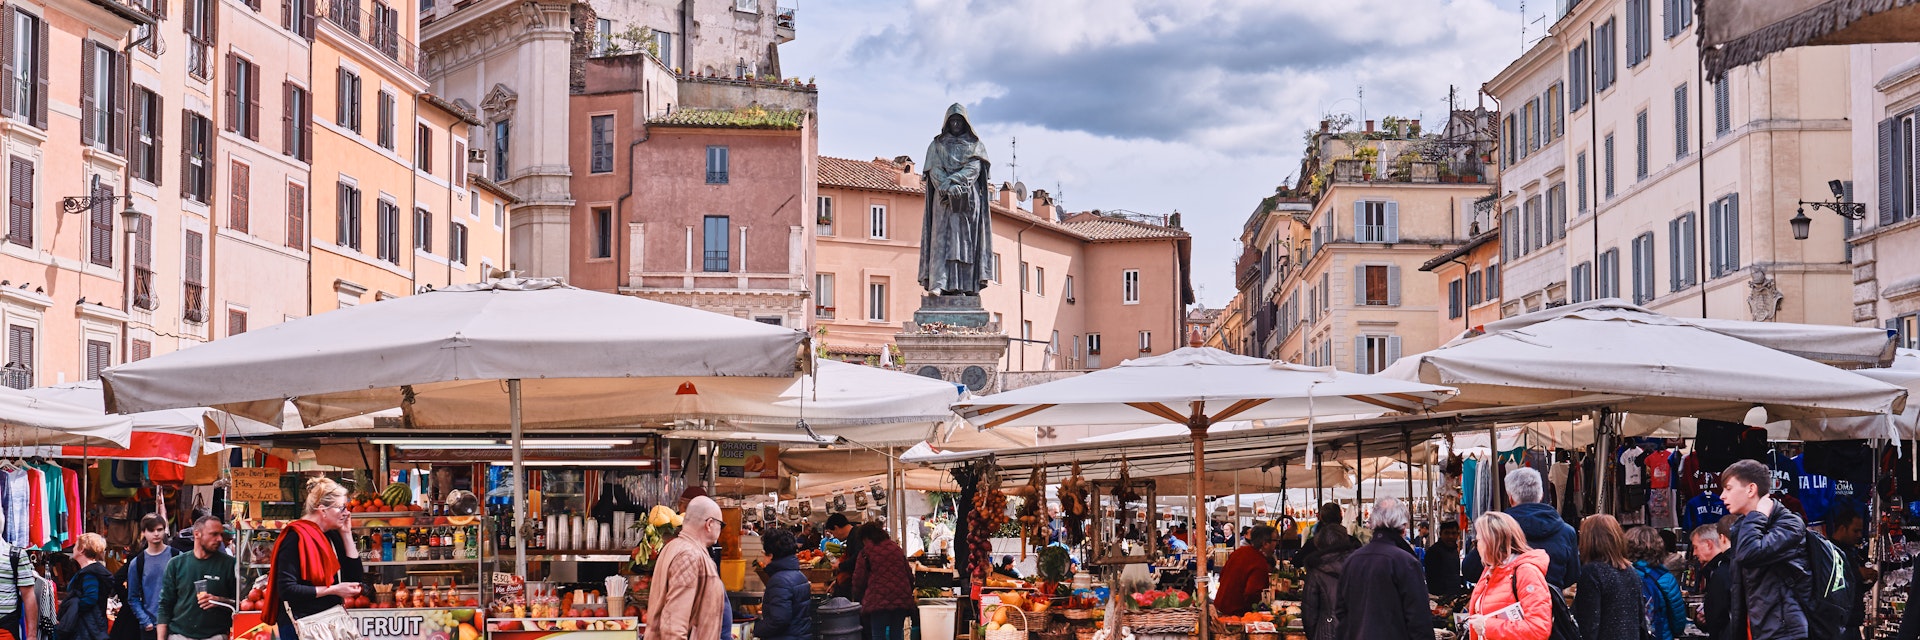 March 8, 2018: Traditional outdoor food market of Campo de Fiori (fields of flower), with the statue of Giordano Bruno in the background.
959994236
People Built Structure Food City History Architecture Nature Vacations Square Horizontal Three Quarter Length Outdoors Europe Tourist Monument Roman Italy Statue City Street Street Market - Retail Space Ancient Famous Place Rome - Italy Vegetable Fruit Flower Sky Agricultural Field Beauty Medium Group Of People Photography Tourism Travel Capital Cities Fiori Giordano Tradition